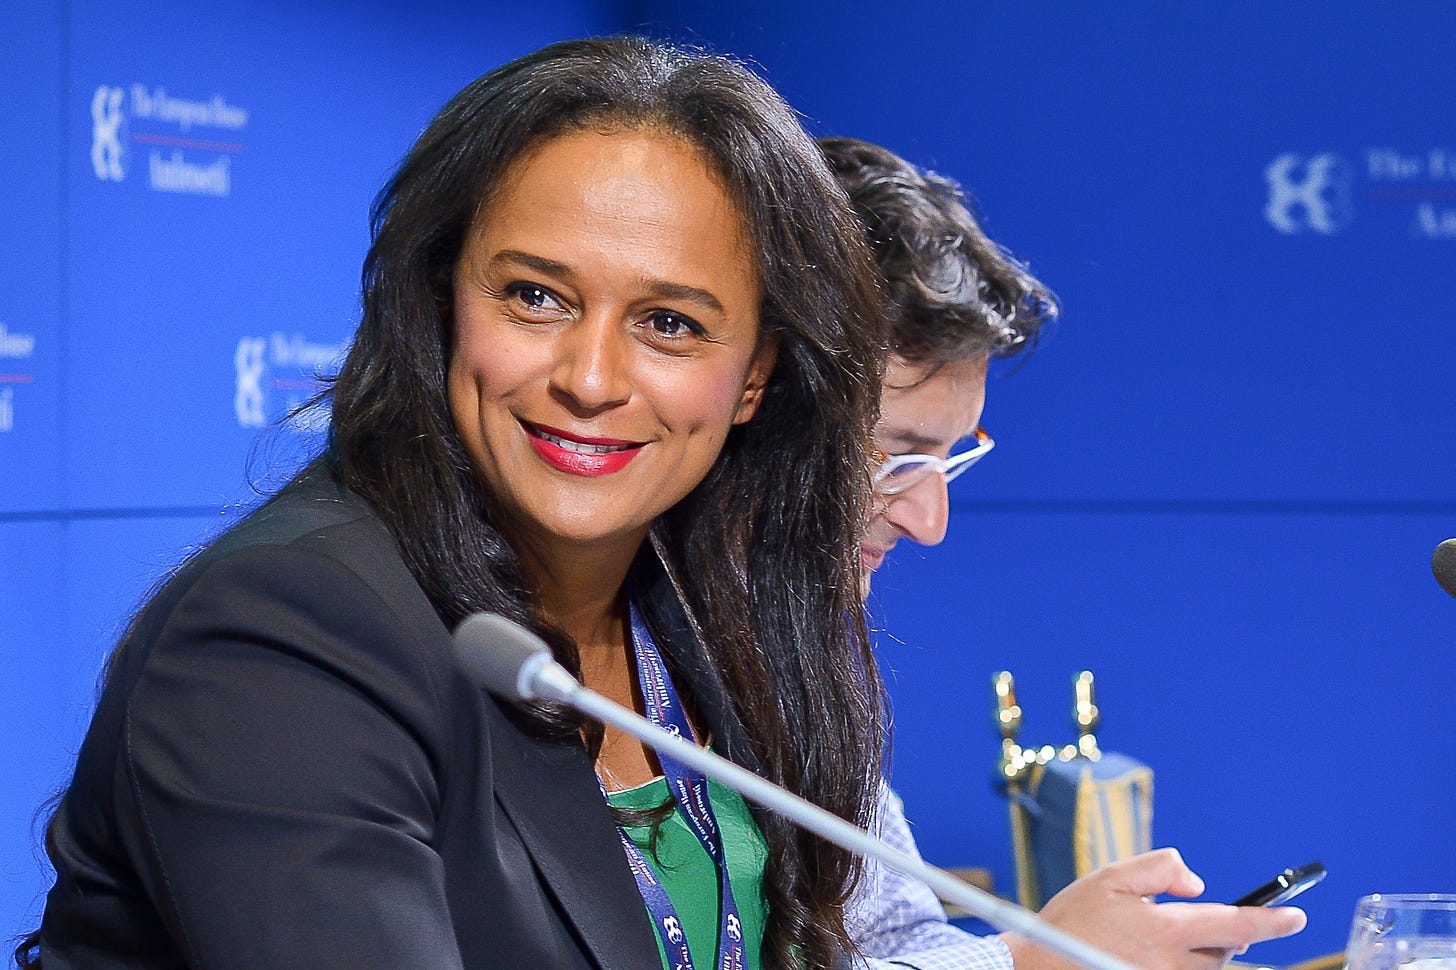 File:Isabel dos Santos03.09.jpg - Wikimedia Commons